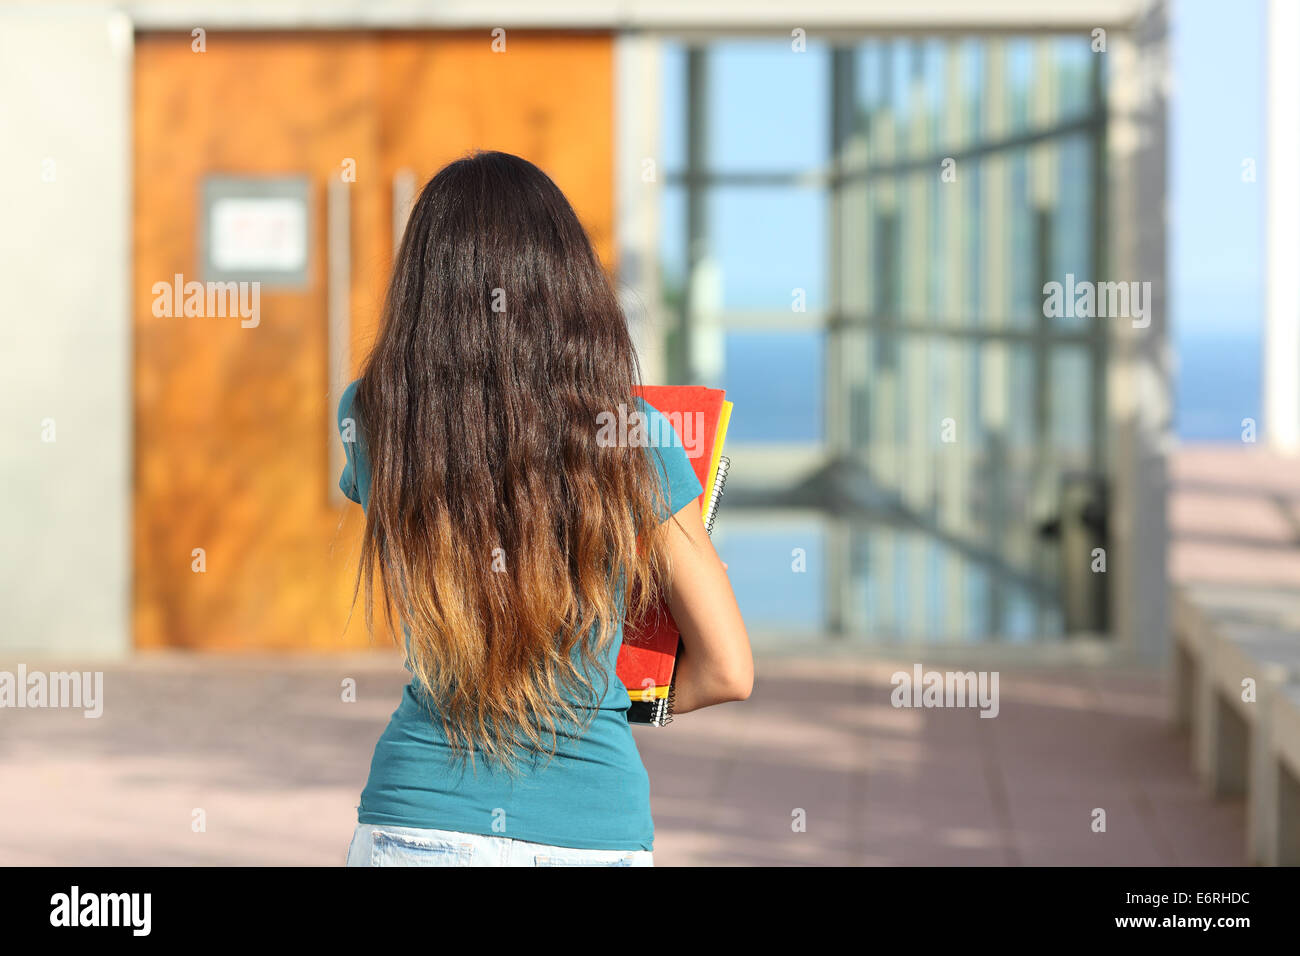 Back view of a teen girl walking towards the school with the door in the background Stock Photo